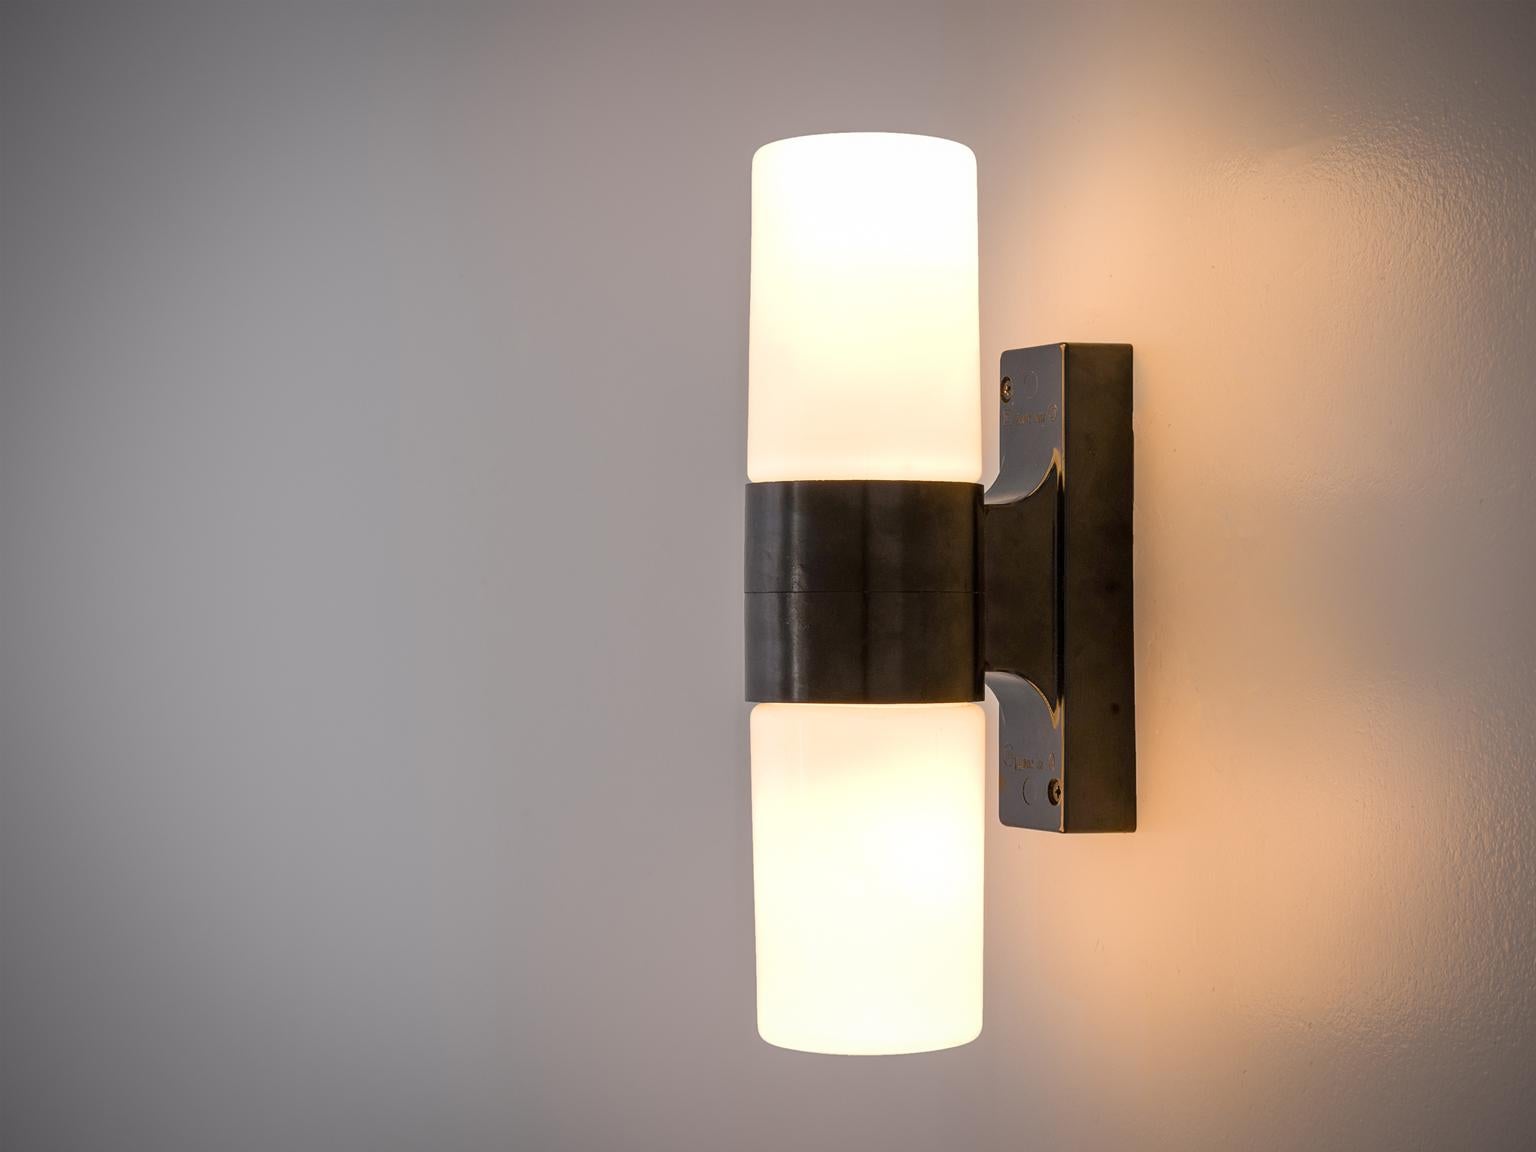 Wall lights, black bakelite and opaline light, Europe, 1970s.

This set of fourteen wall lights is Minimalist and features a black frame combined with white glass cylinders. The cylinder is attached with a rectangular block to the wall and holds the